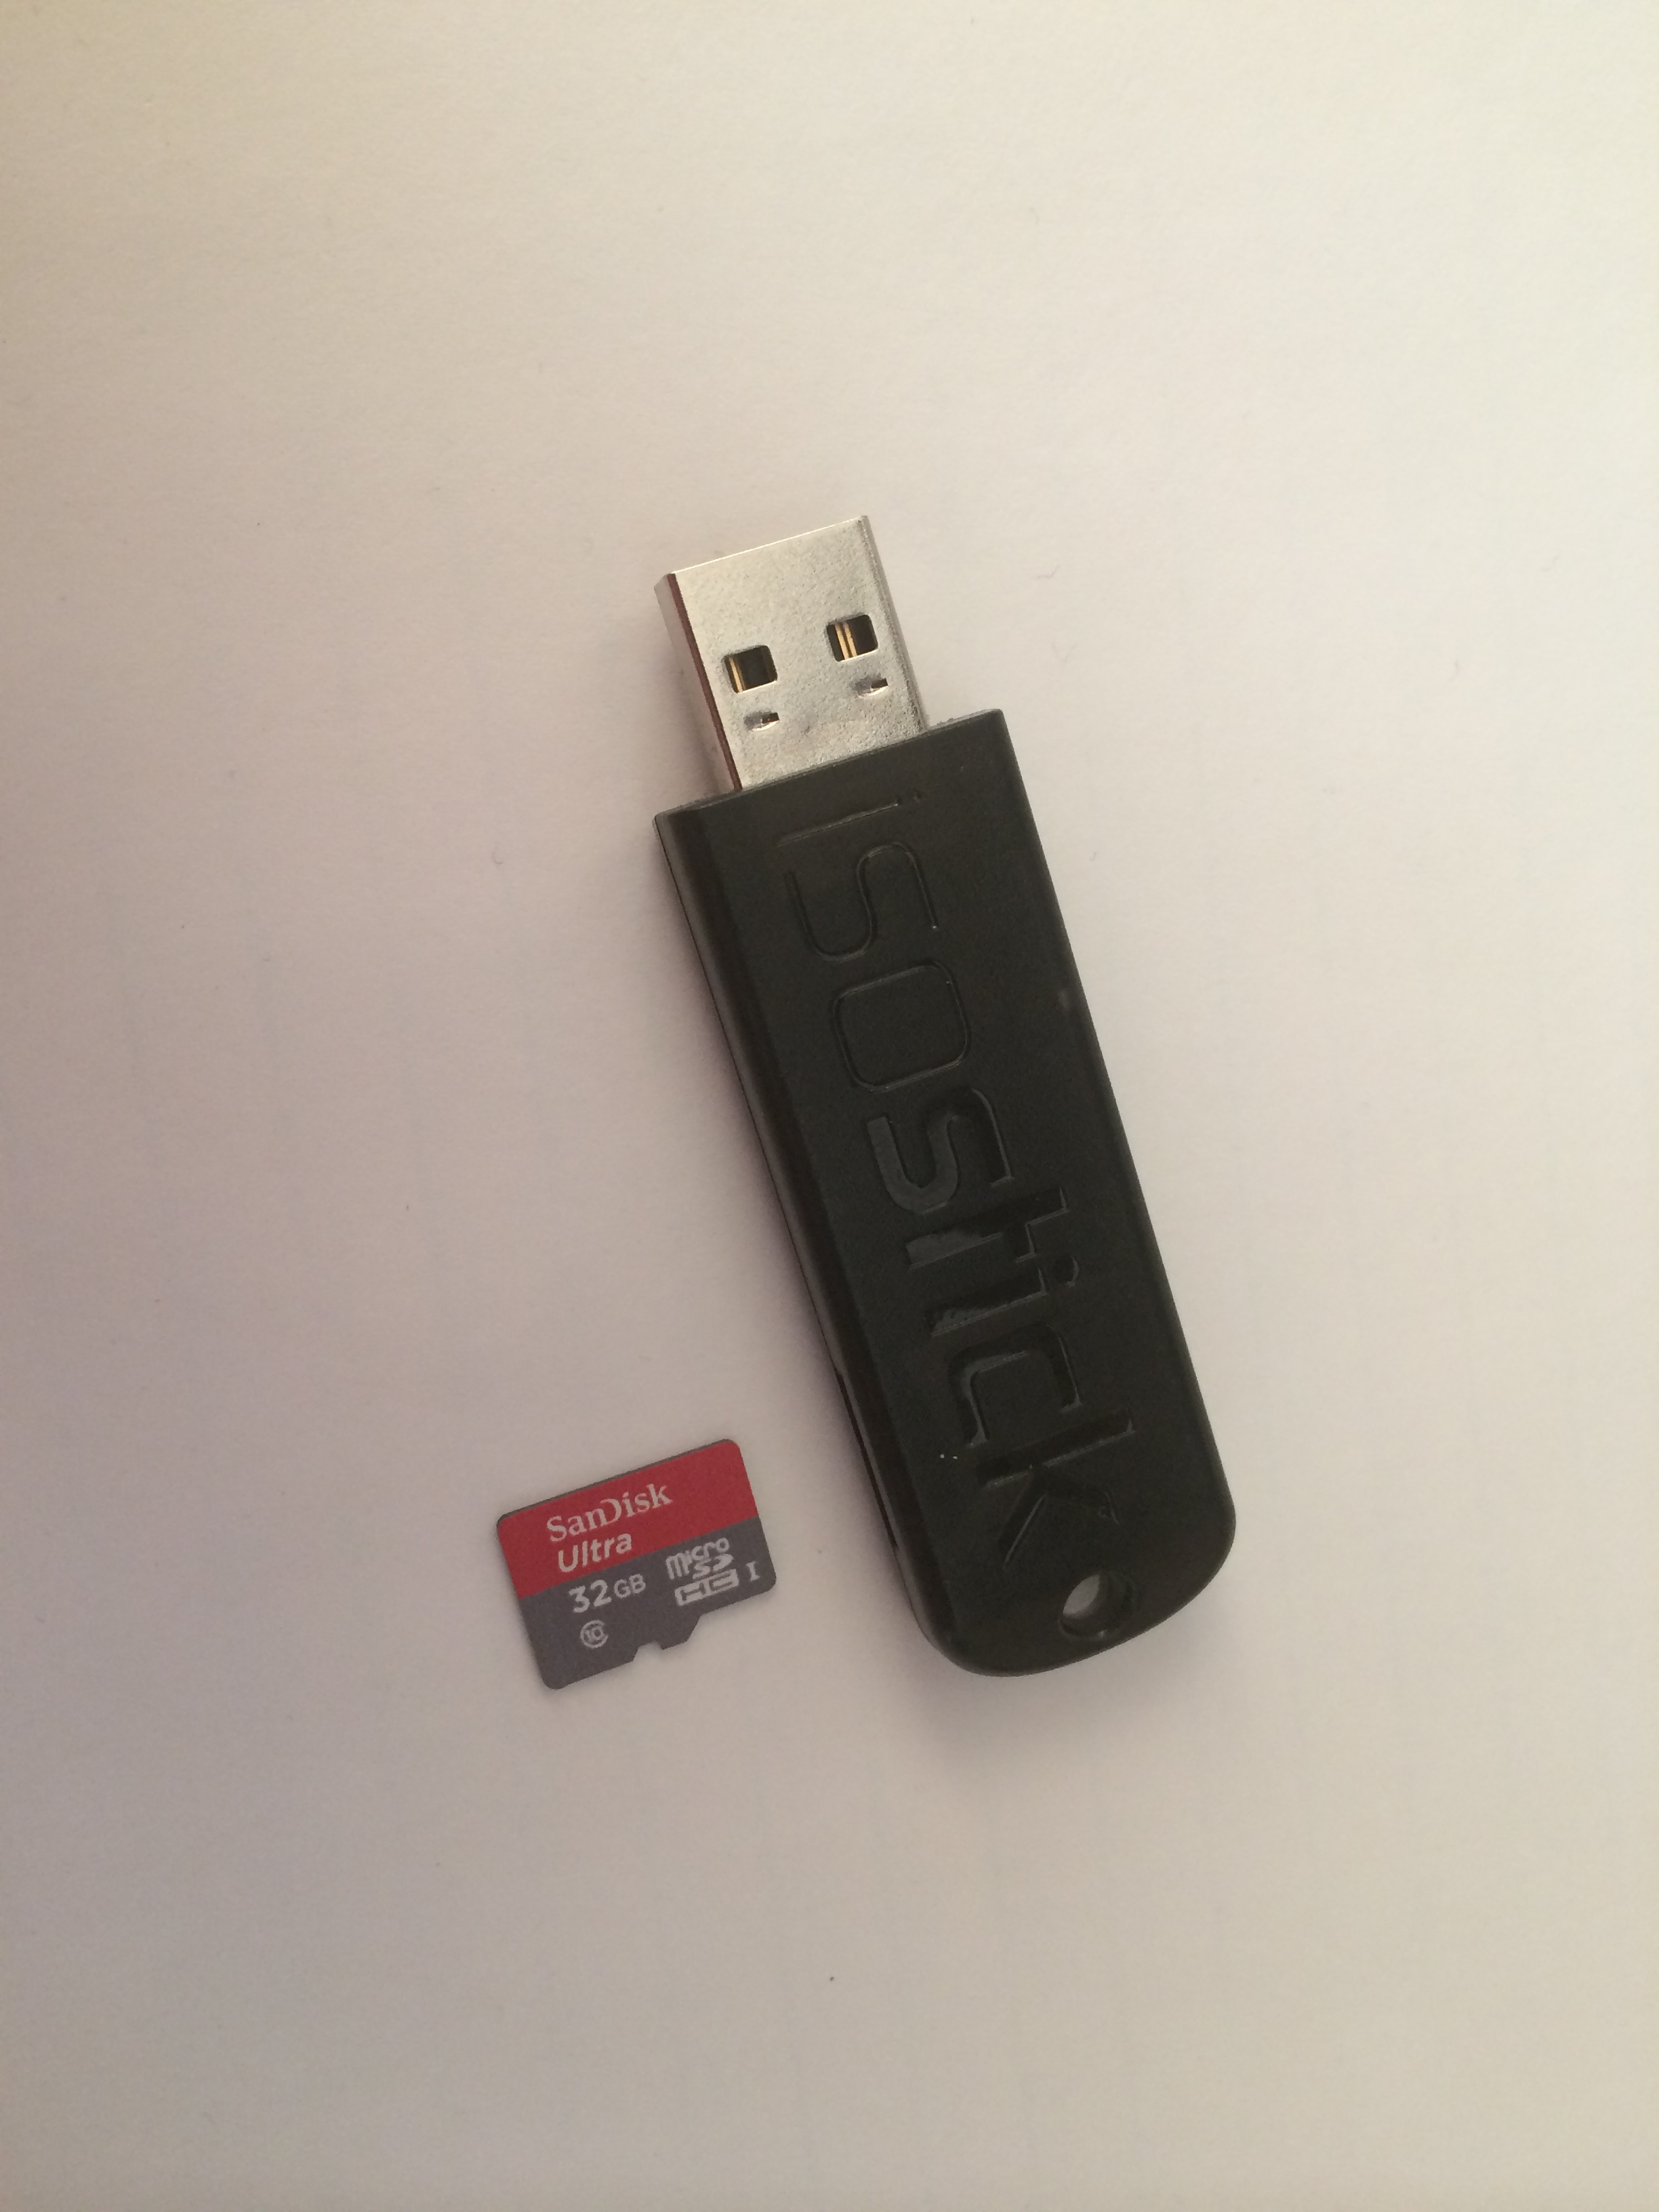 ISOSTICK with a Micro SD card.